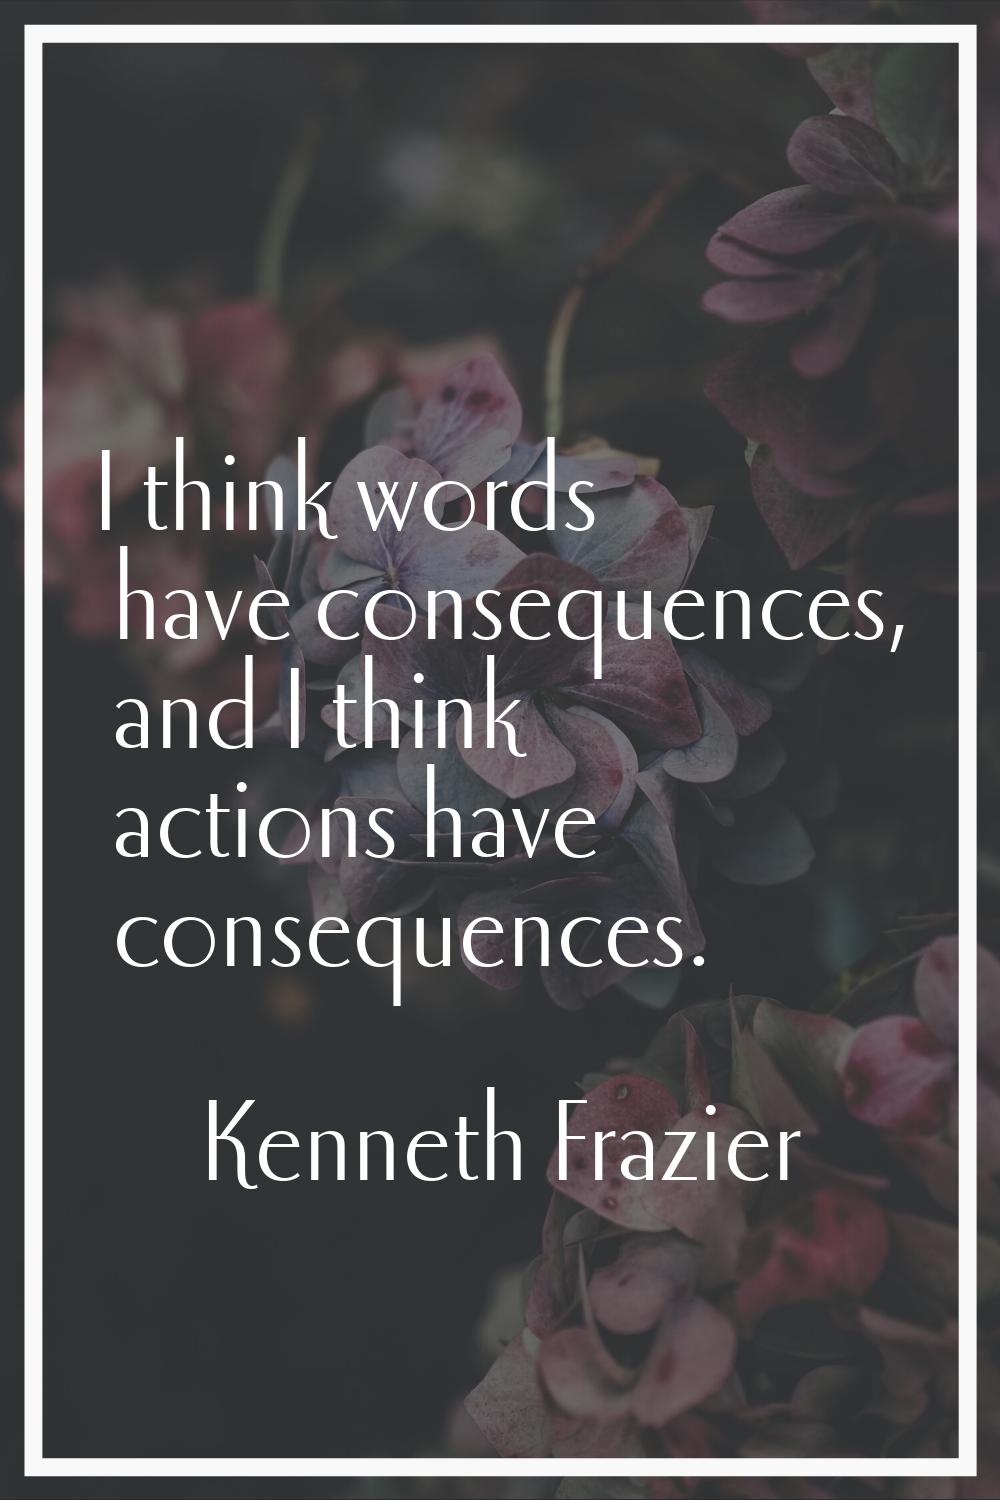 I think words have consequences, and I think actions have consequences.